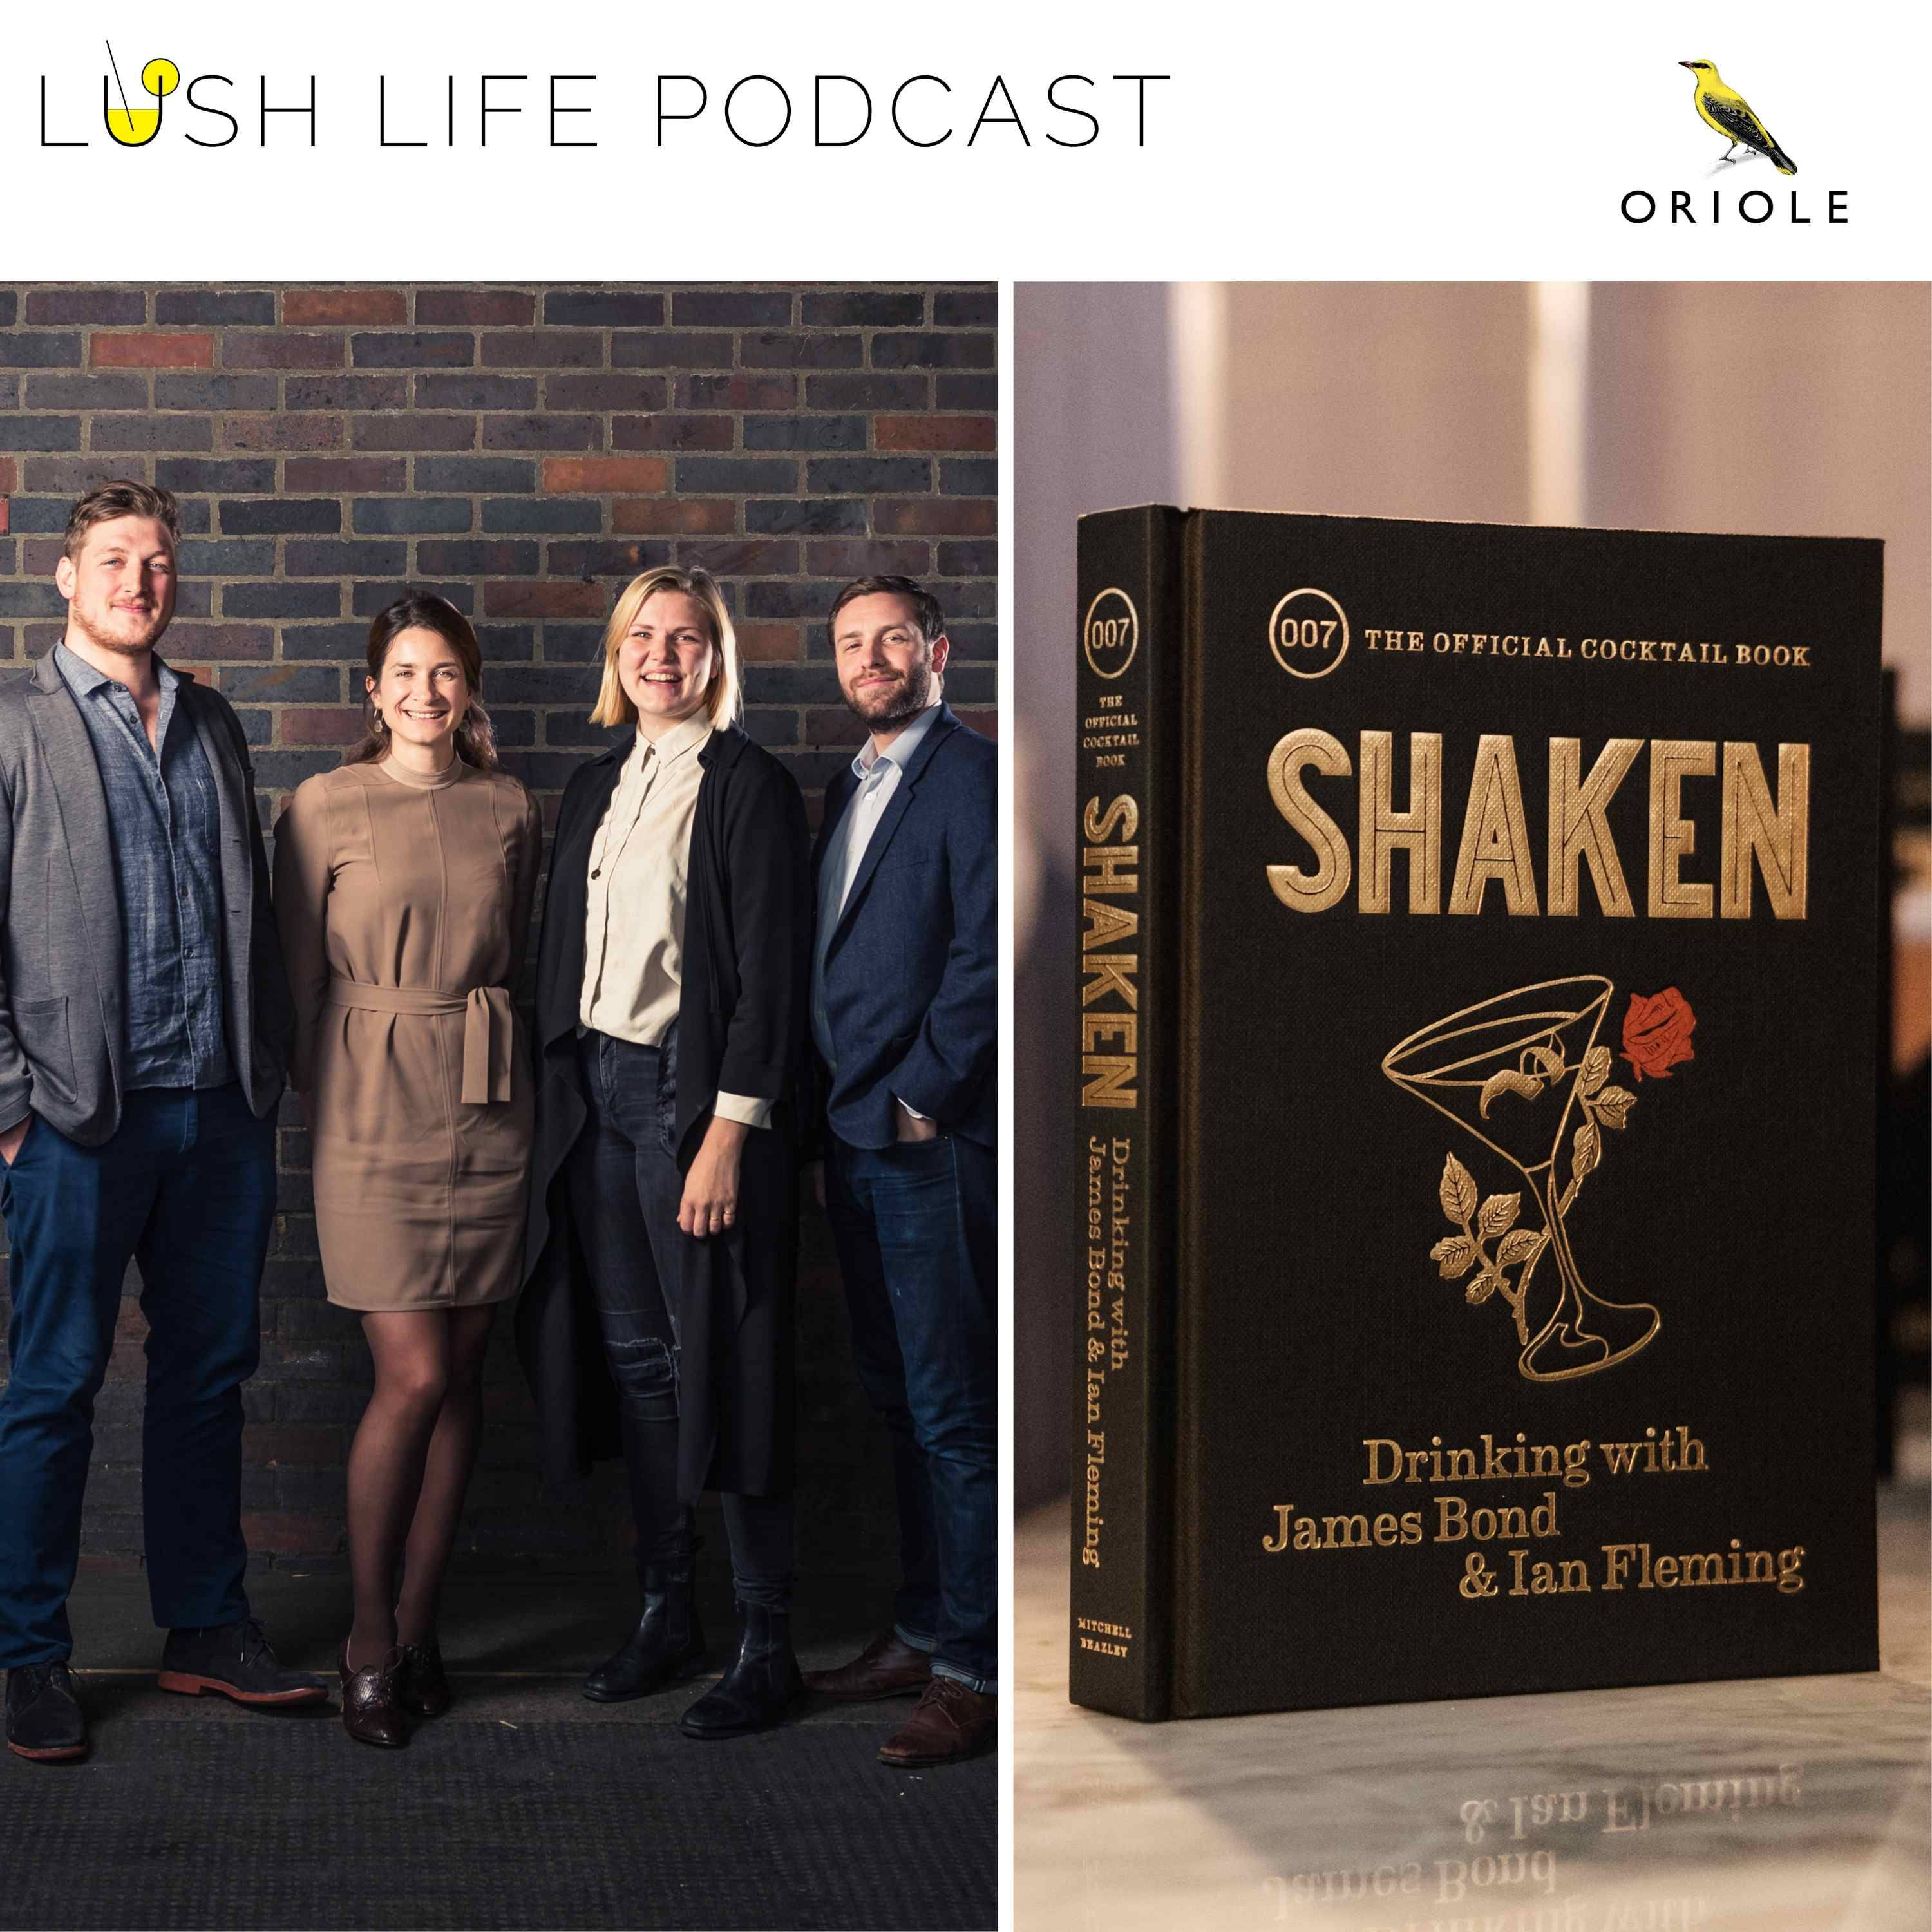 How to Read Shaken - Drinking with James Bond and Ian Fleming with Mia Johansson, Bobby Hiddleston, & Edmund Weil